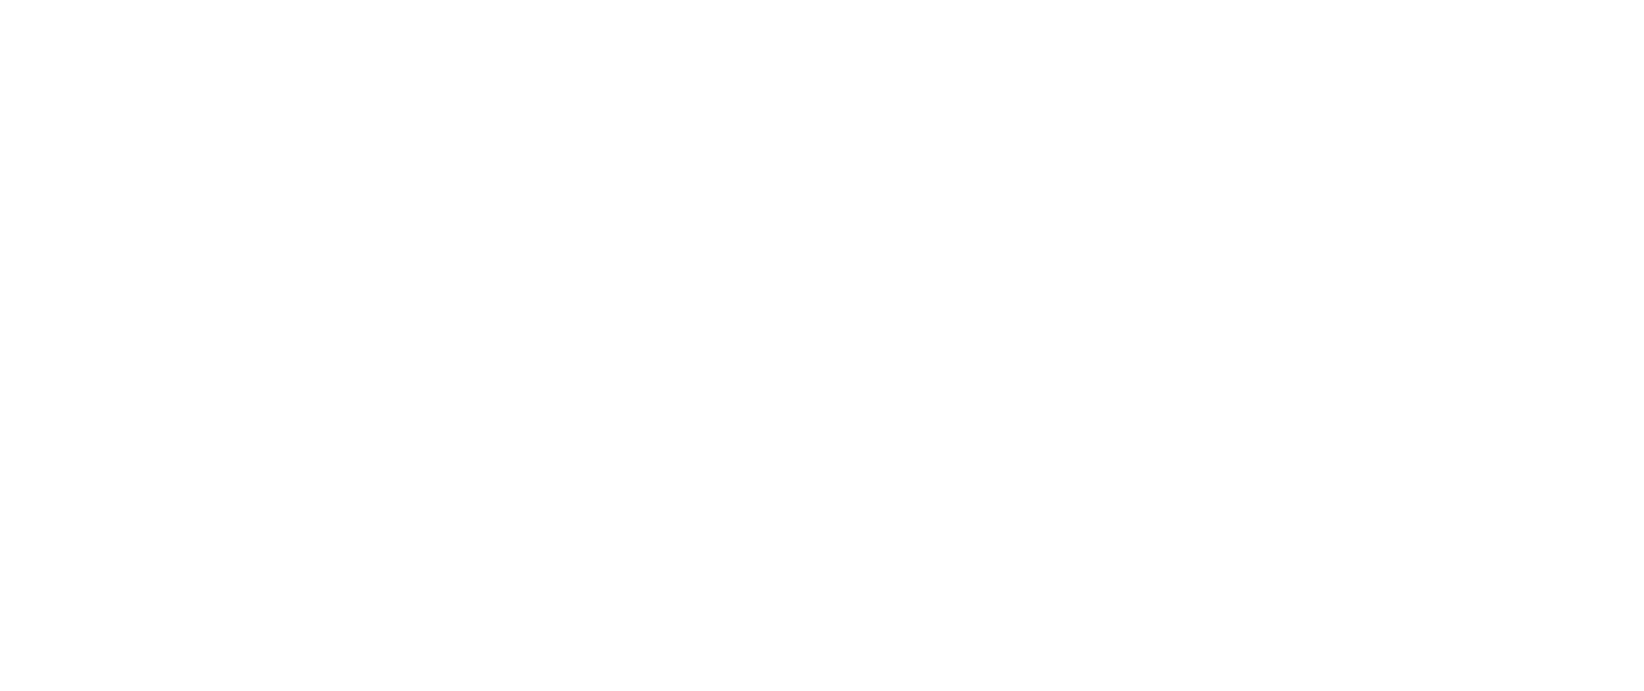 Leading Real Estate Companies of the World logo